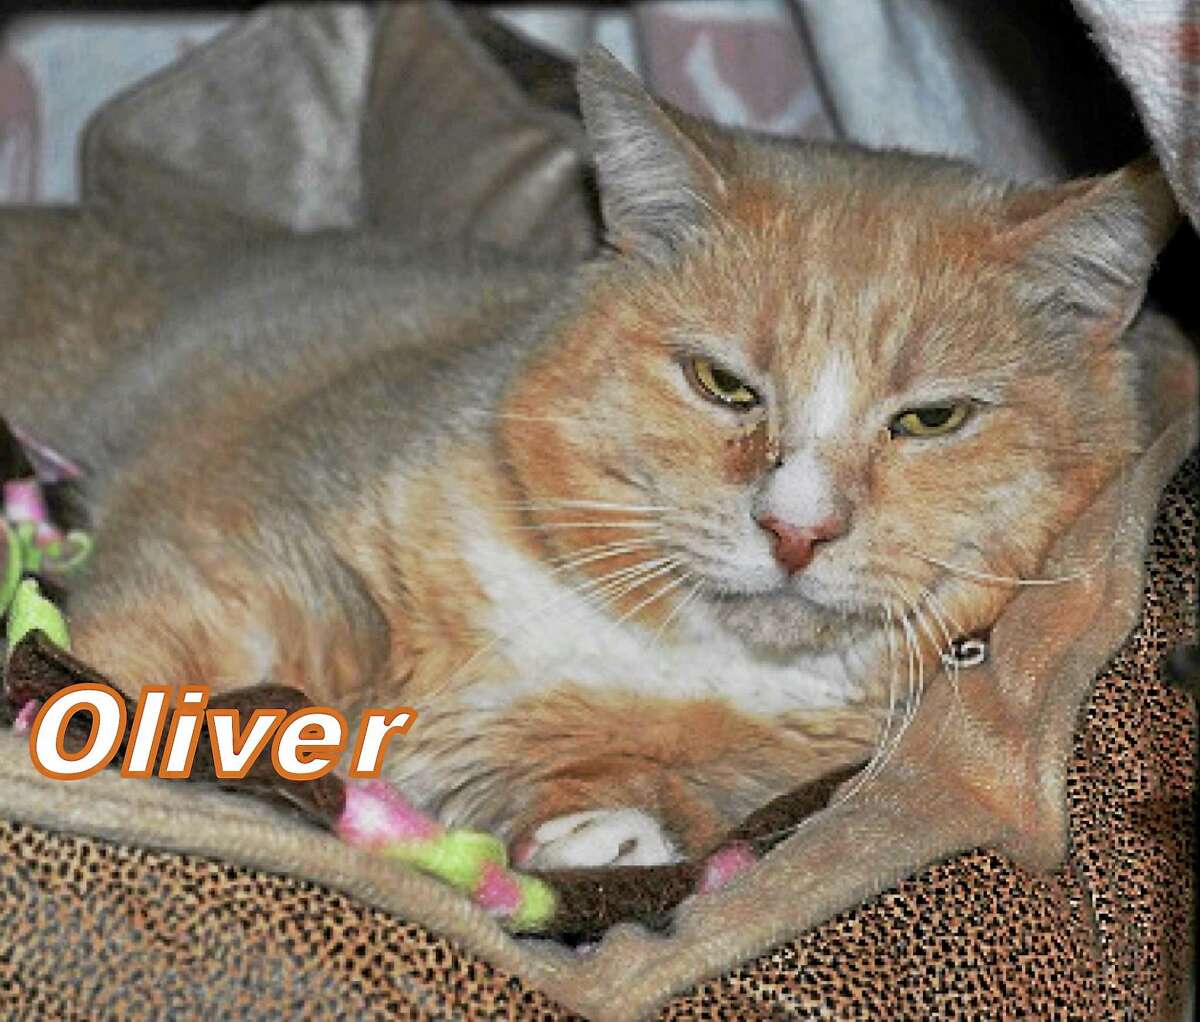 I'm Oliver! I am about 2 years old, Orange/Buff-colored neutered male. I am a laid back, easy-going boy and love to be petted and snuggled. I get along well with other cats, but I would also do just fine as the only pet. A quiet home with a devoted owner who will give me time to adjust is what I am looking for. Once I get to know you, I will give you lots of love in return! I am patiently waiting for someone to give me a chance of a forever home where I can give and get love and attention! Cat Tales is seeking permanent adoption for me and will tell you the best way to take care of me. Please call Cat Tales at (860) 344-9043 or Email: info@CatTalesCT.org to inquire about Oliver!